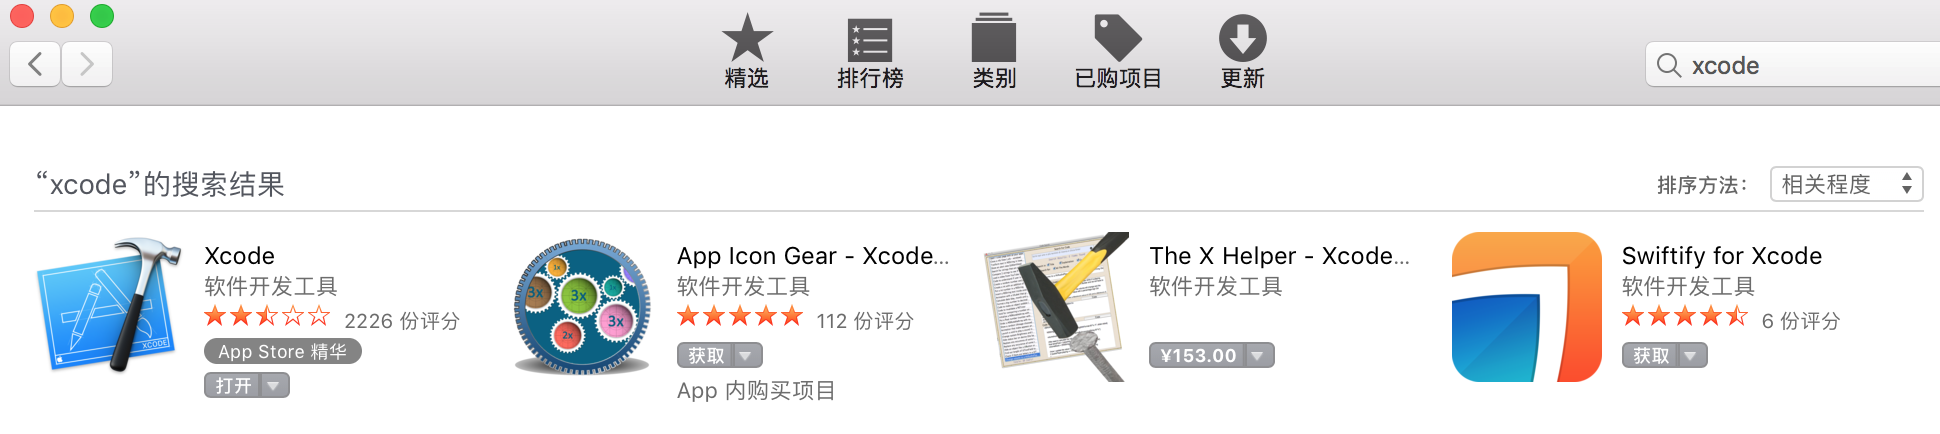 xcode_install